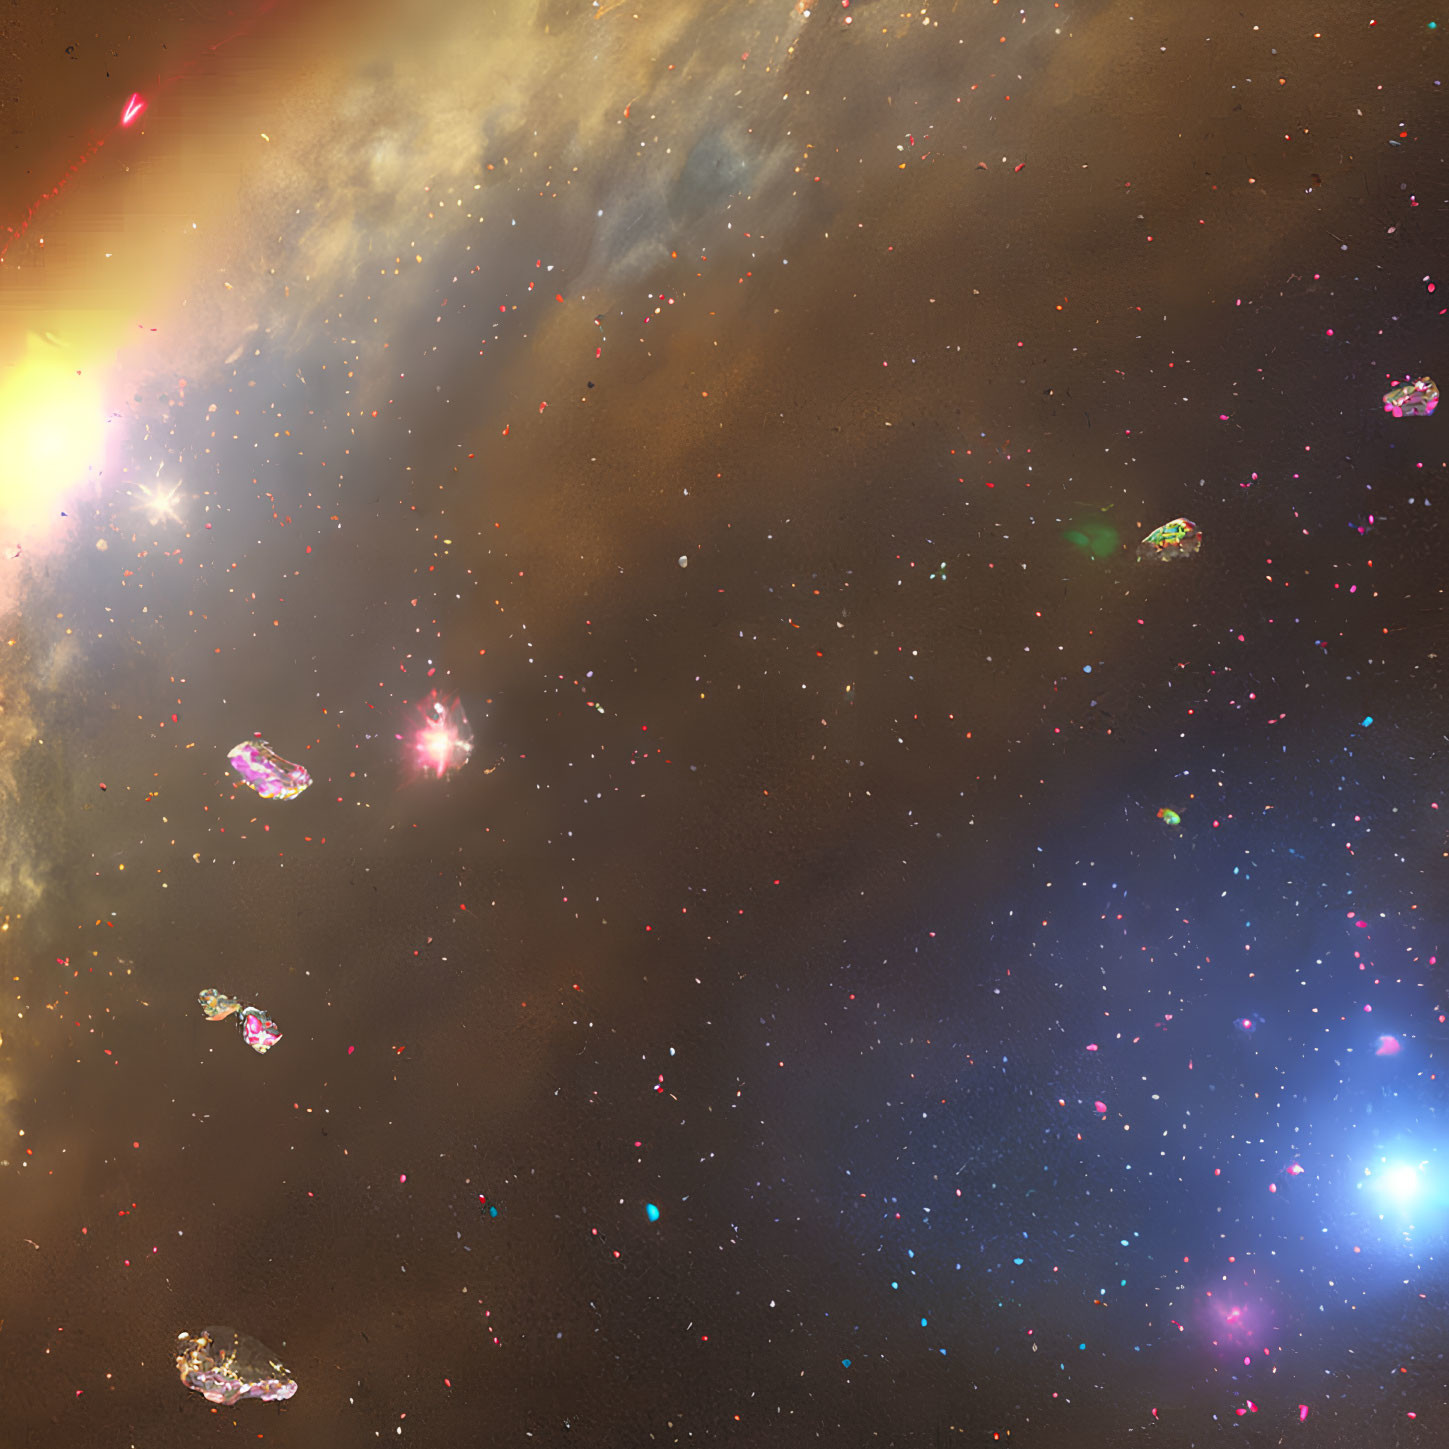 Colorful Nebulae and Stars in Cosmic Space Scene